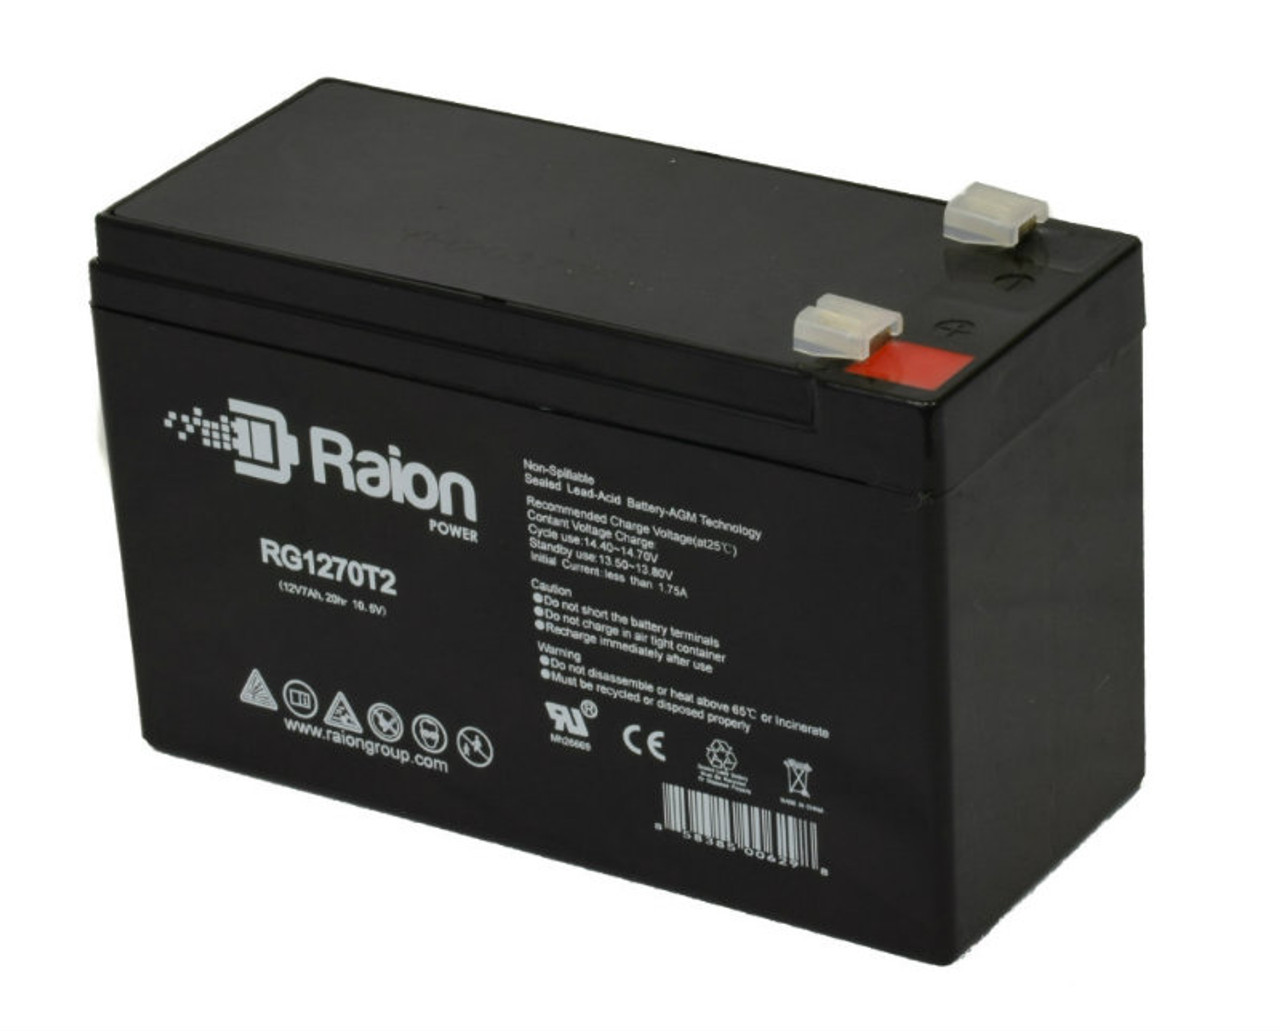 Raion Power RG1270T1 12V 7Ah Non-Spillable Replacement Battery for Sentry PM1270